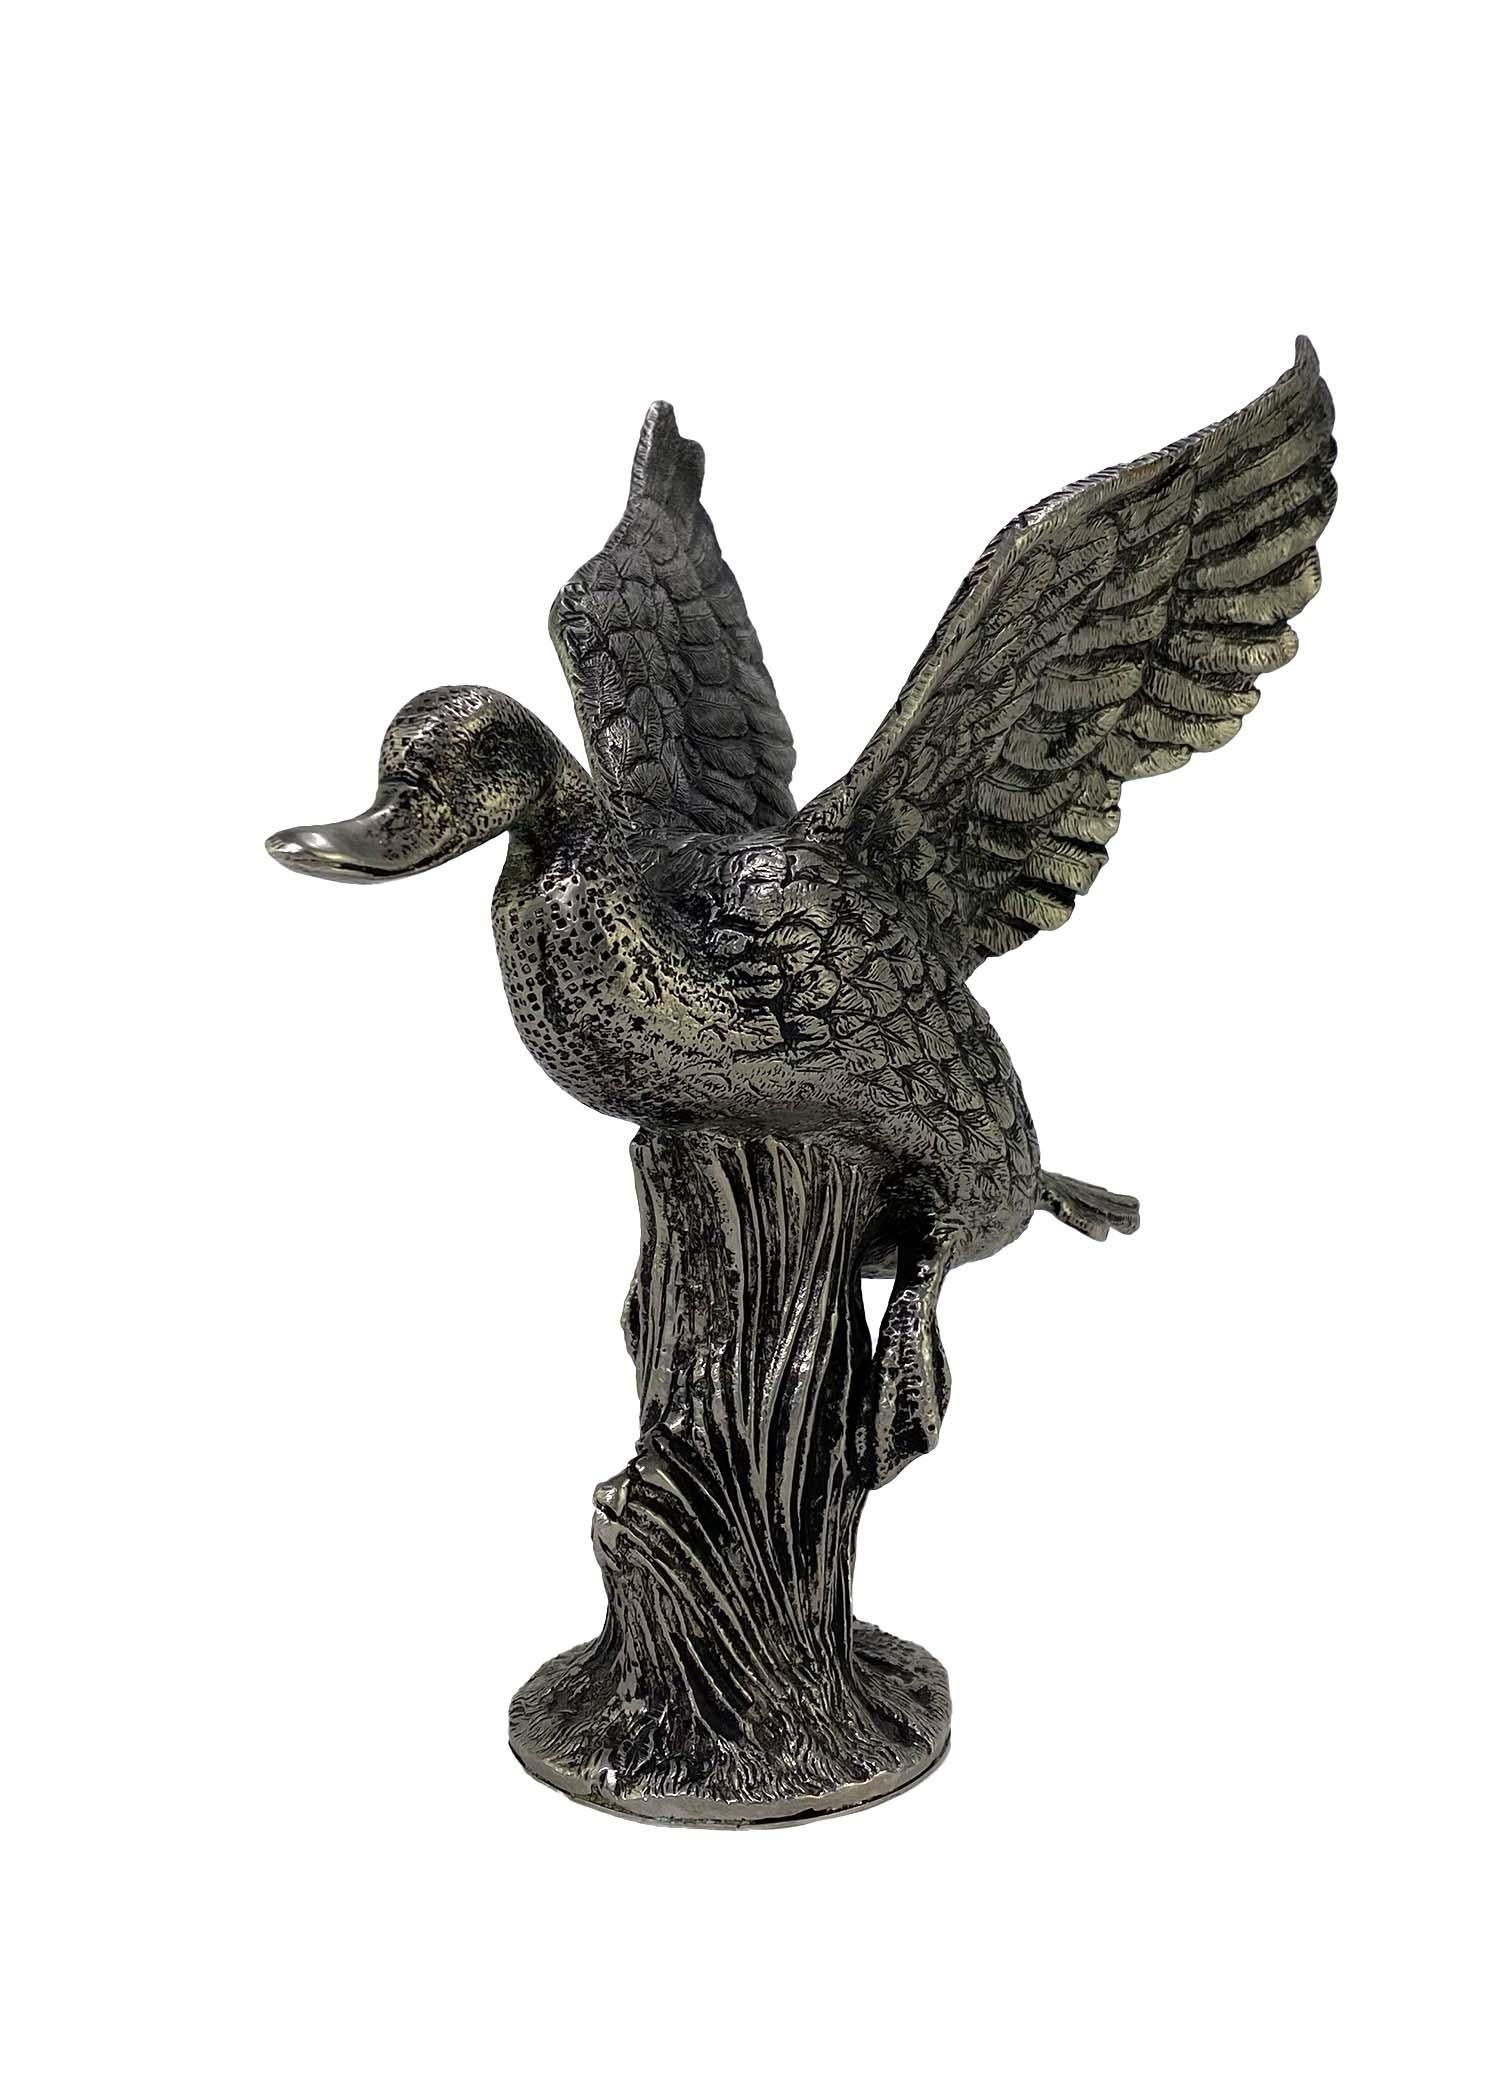 1970s Gucci Mallard Duck Figural Metal Sculpture Pair In Good Condition For Sale In West Hollywood, CA